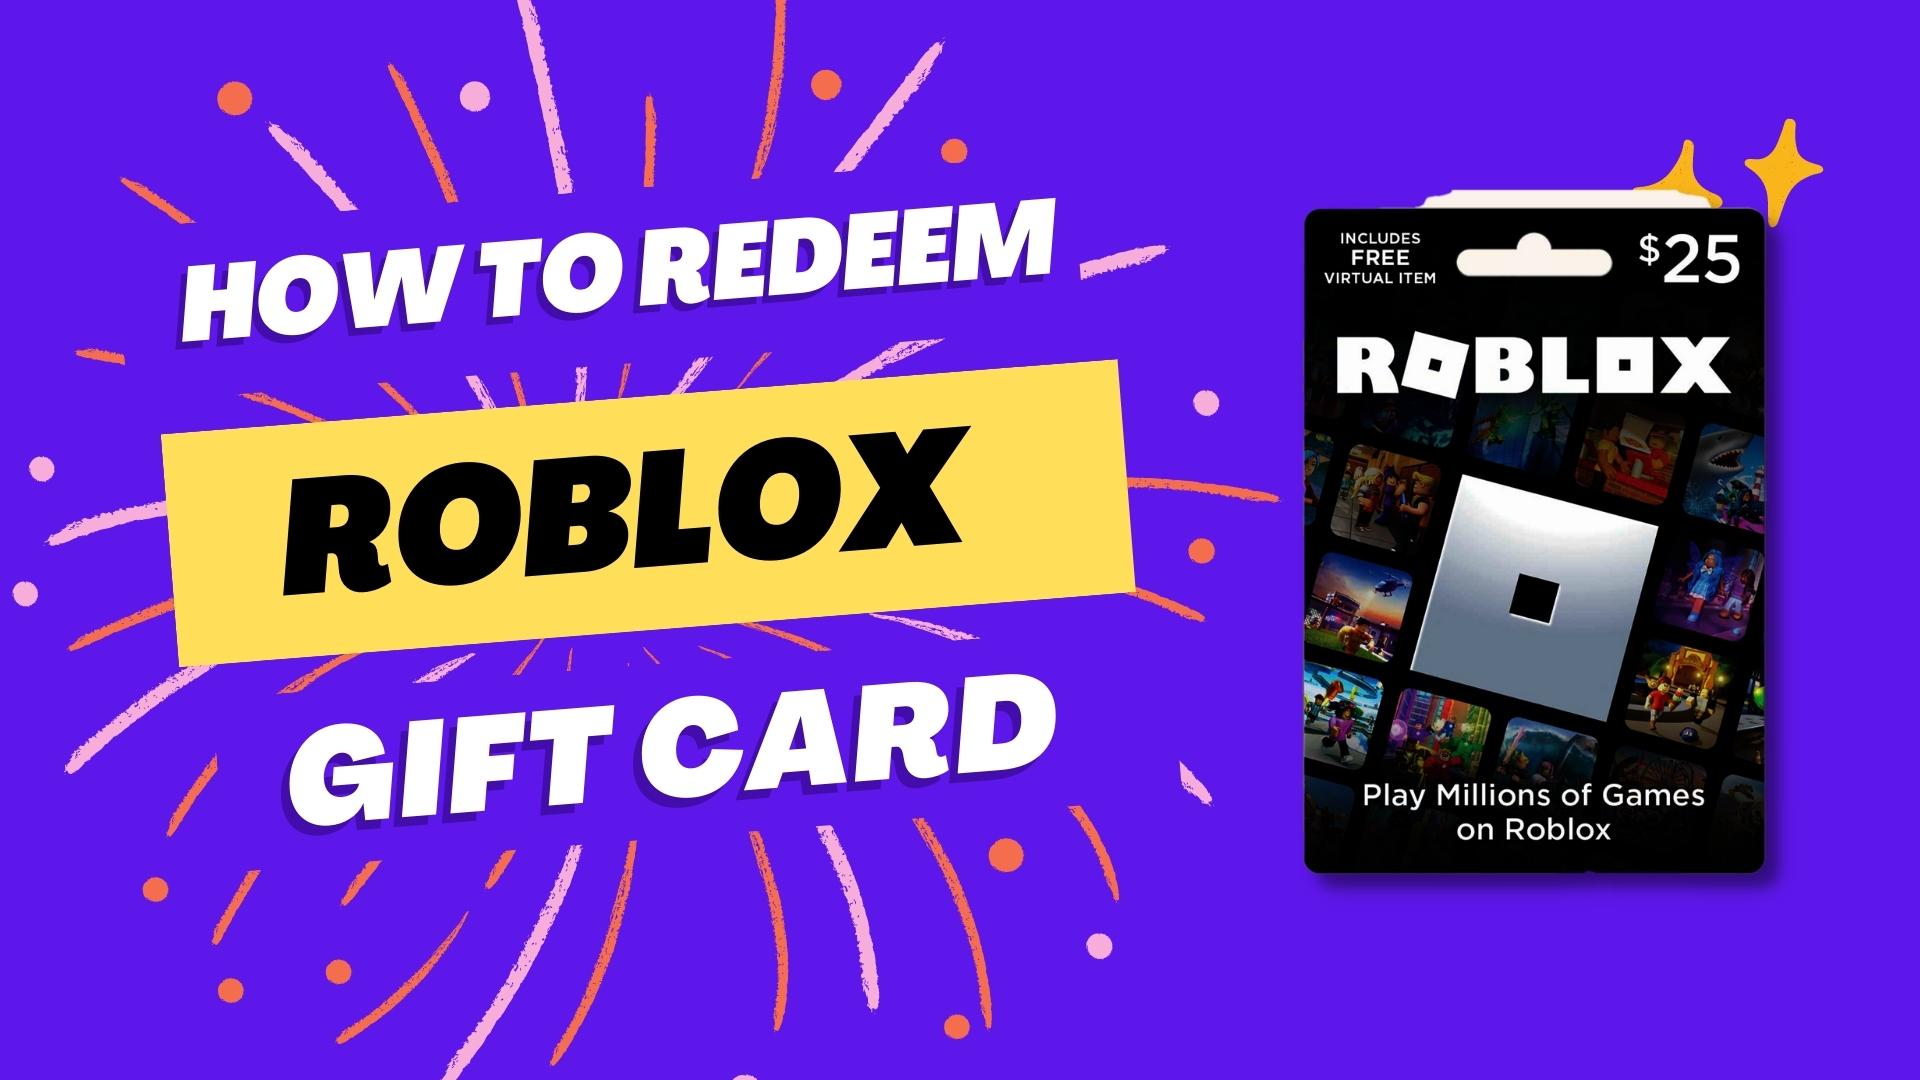 HOW TO REDEEM ROBLOX GIFT CARD CODES ON MOBILE! (2022) 